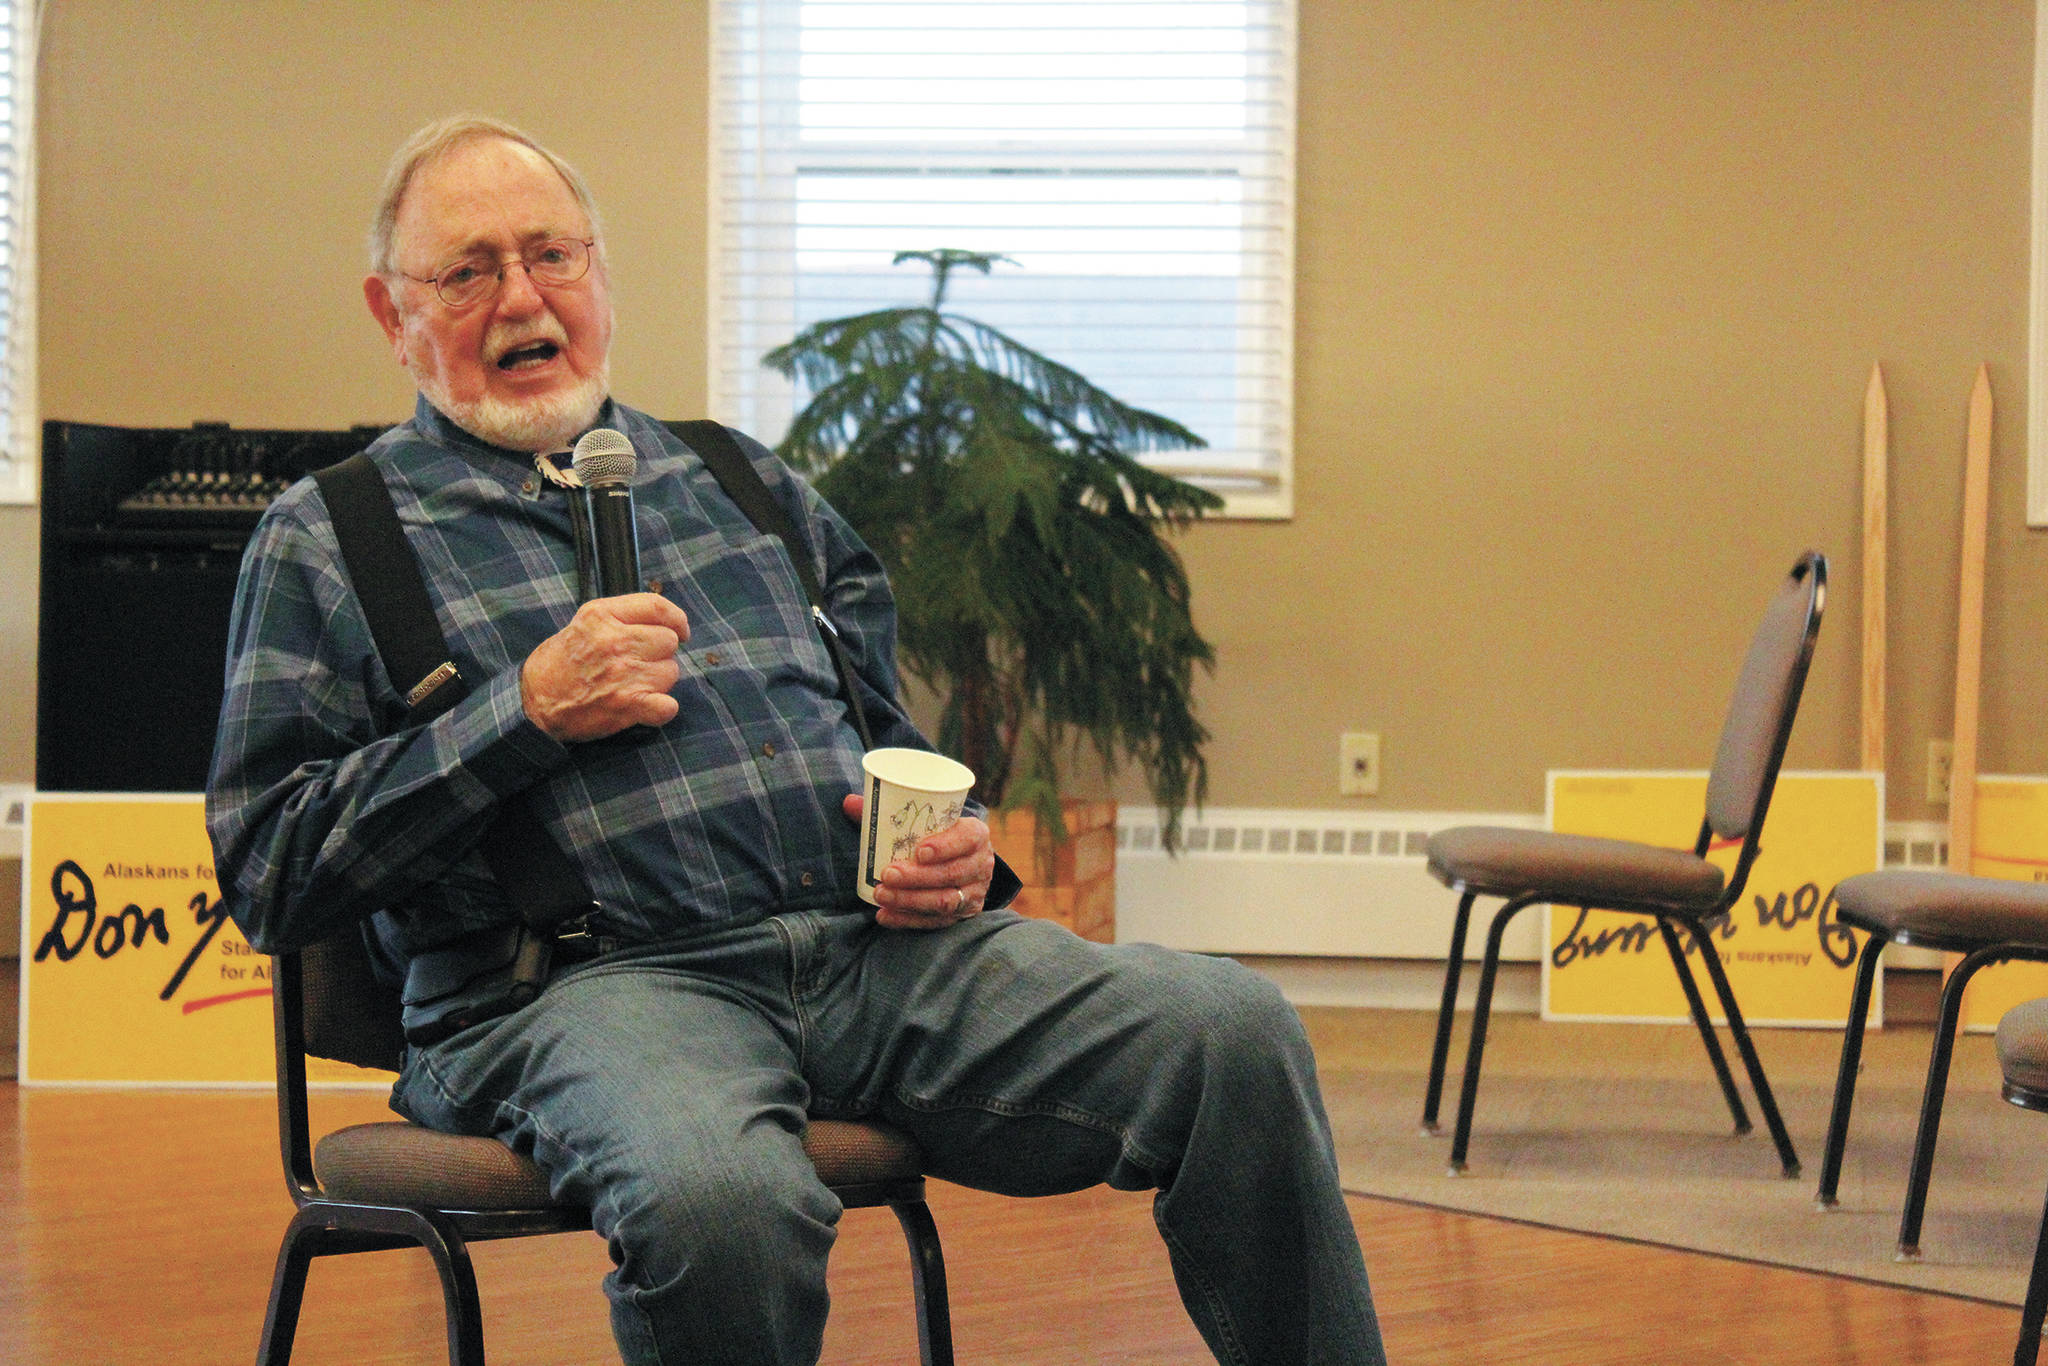 Rep. Don Young speaks during a campaign event Tuesday, Oct. 20, 2020 at Land's End Resort in Homer, Alaska. (Photo by Megan Pacer / Homer News File)